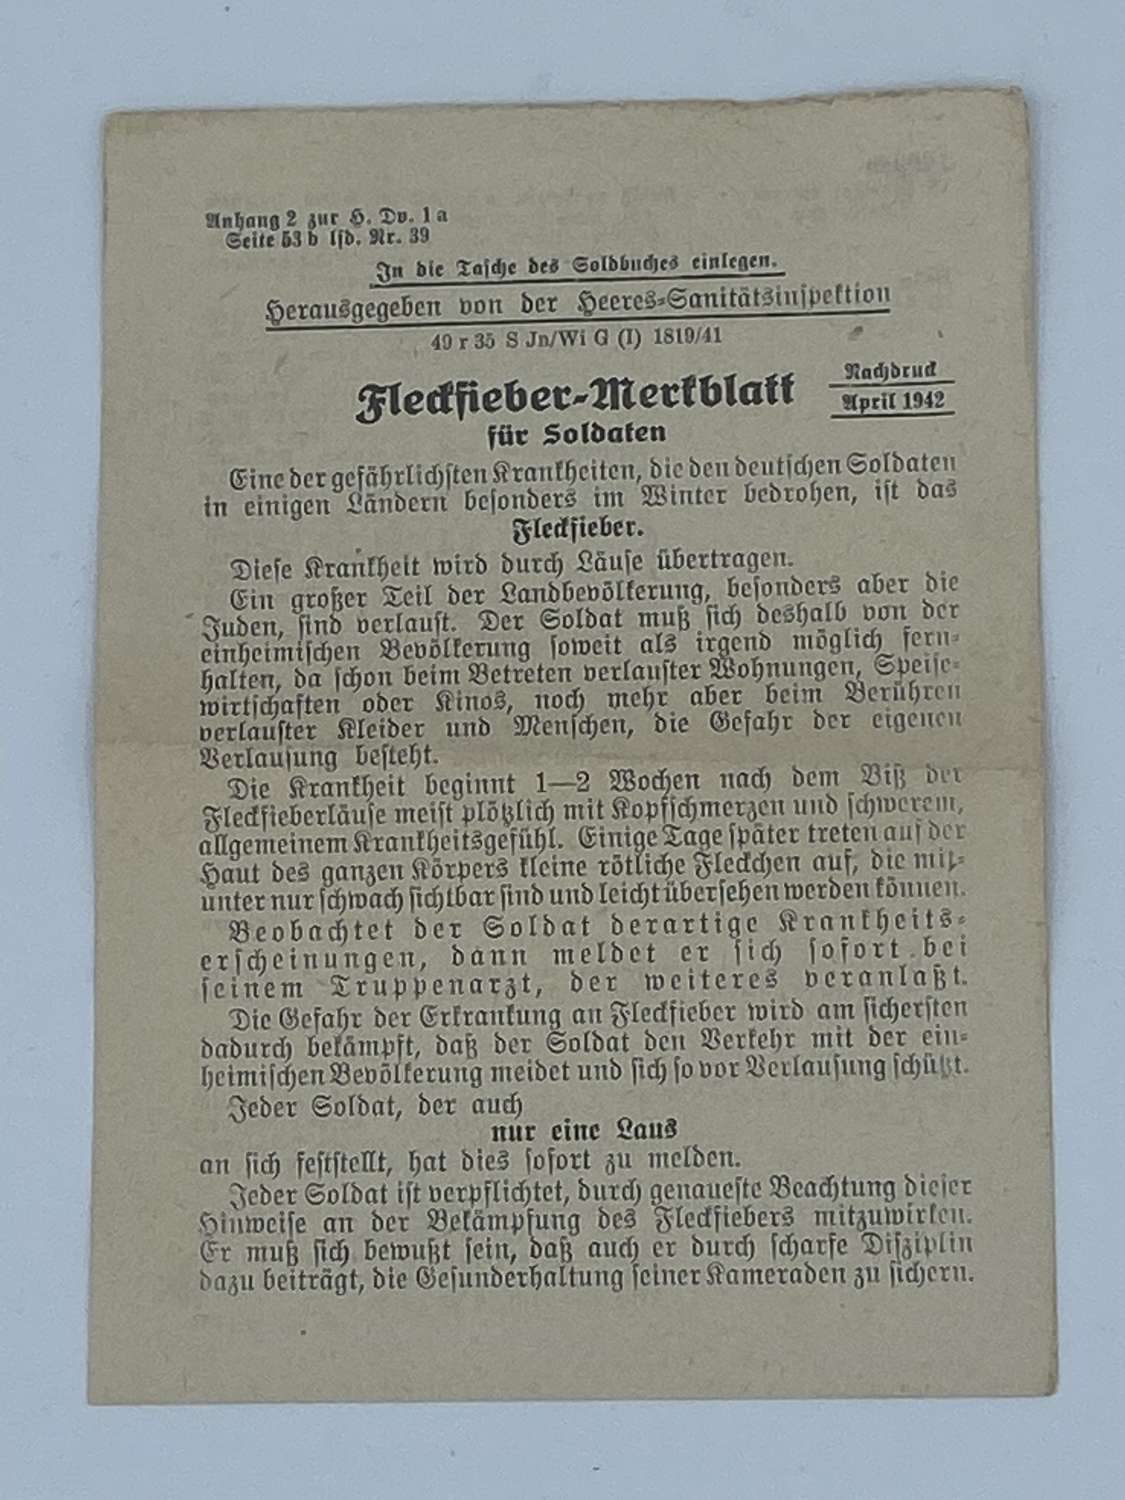 WW2 German Warning Leaflet For Typhus & Stay Away From Jews